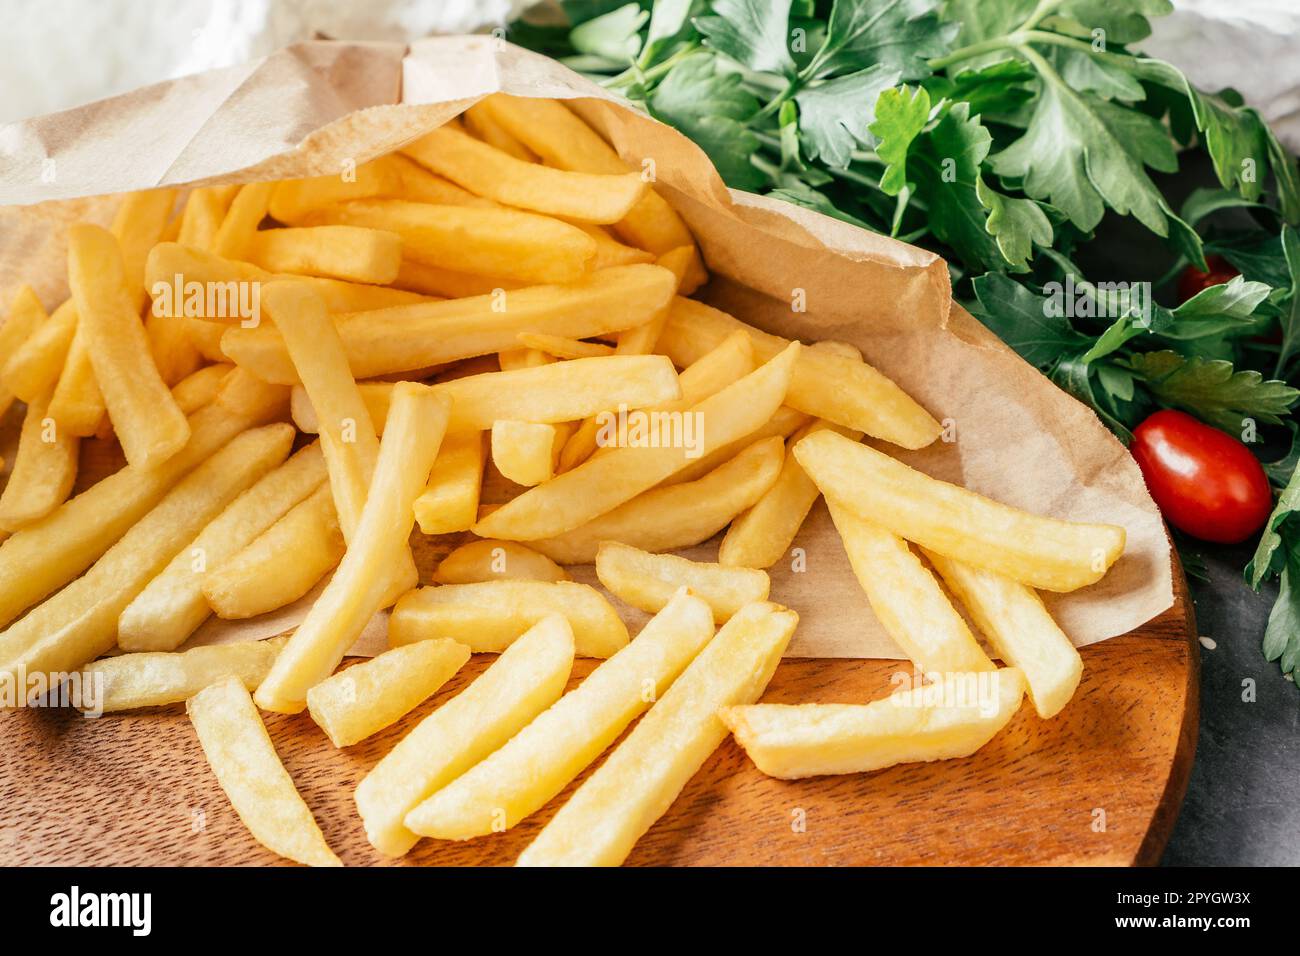 Perfect French Fries Potatoes In Red And Yellow Paper Bag Packaging Pocket  Stock Photo - Download Image Now - iStock